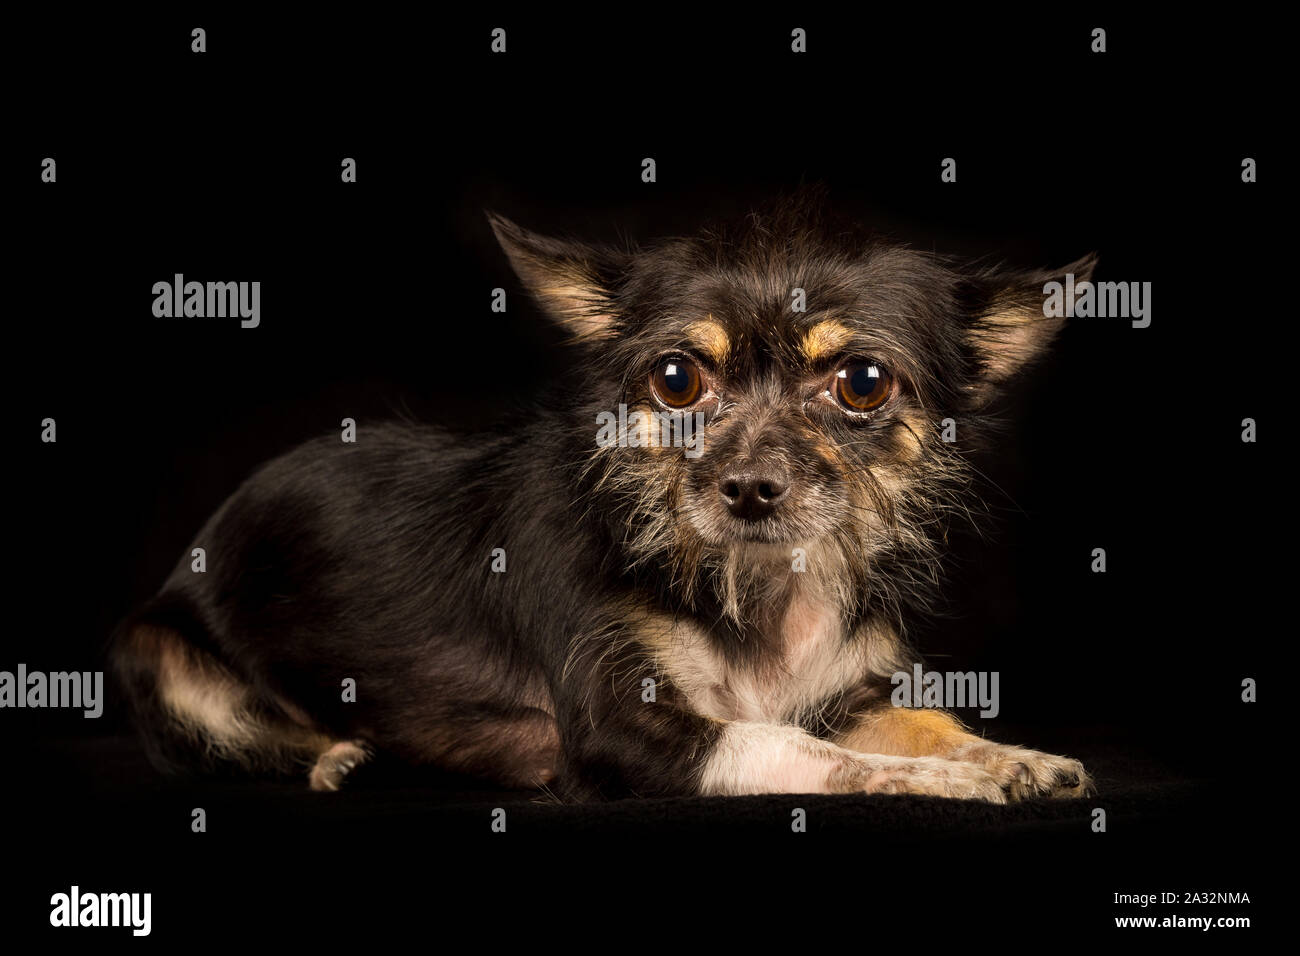 Chihuahua Yorkshire Terrier mongrel, sweet dog on black background Stock Photo